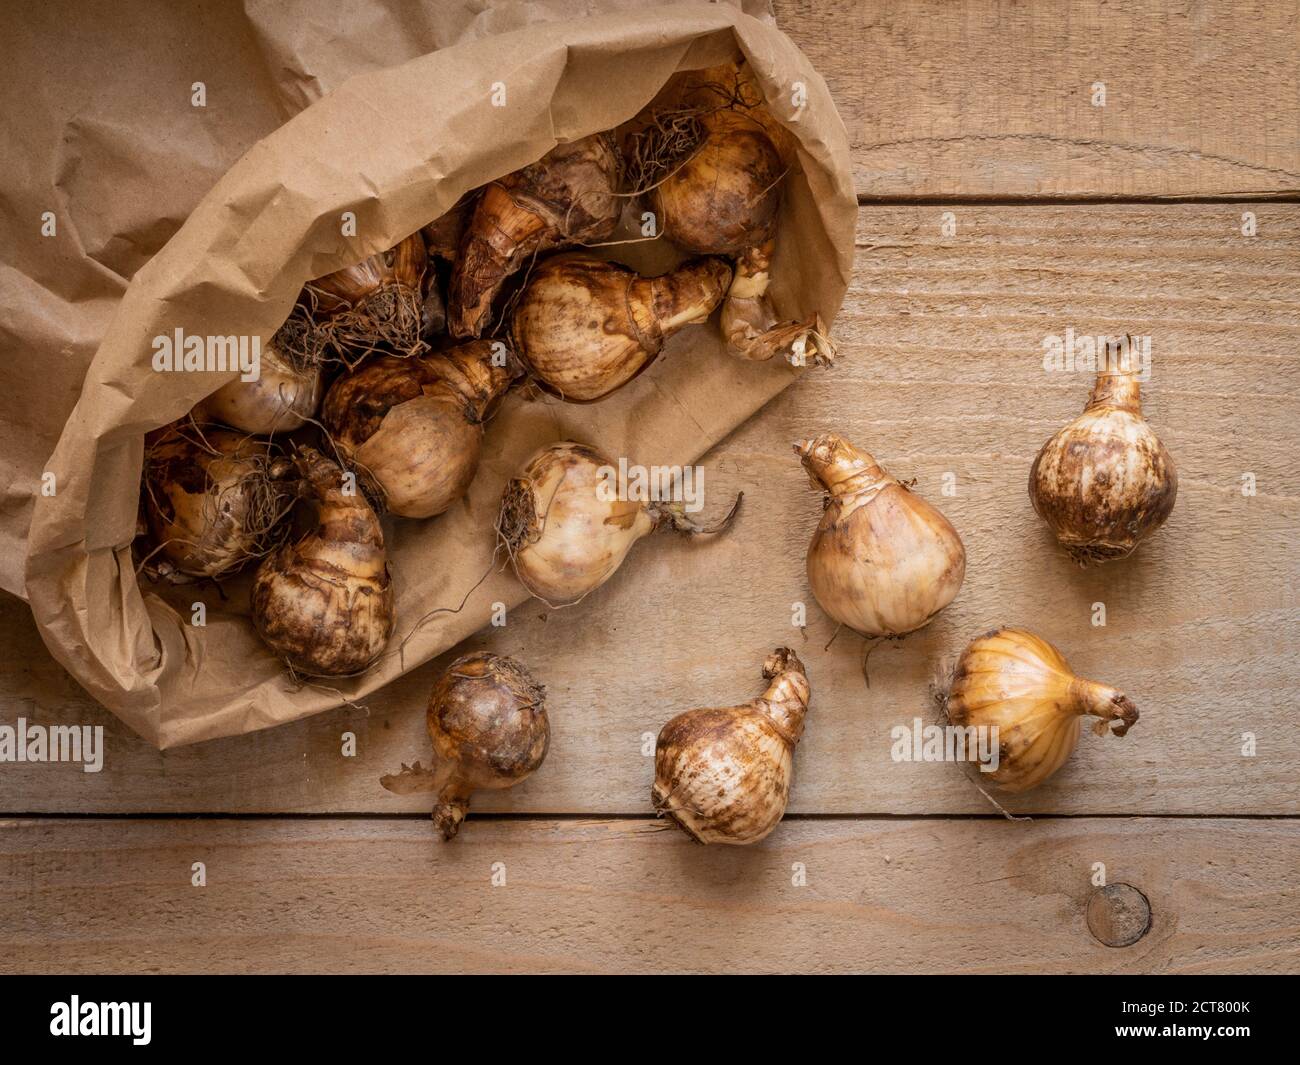 Brown paper bag containing daffodil bulbs. Stock Photo